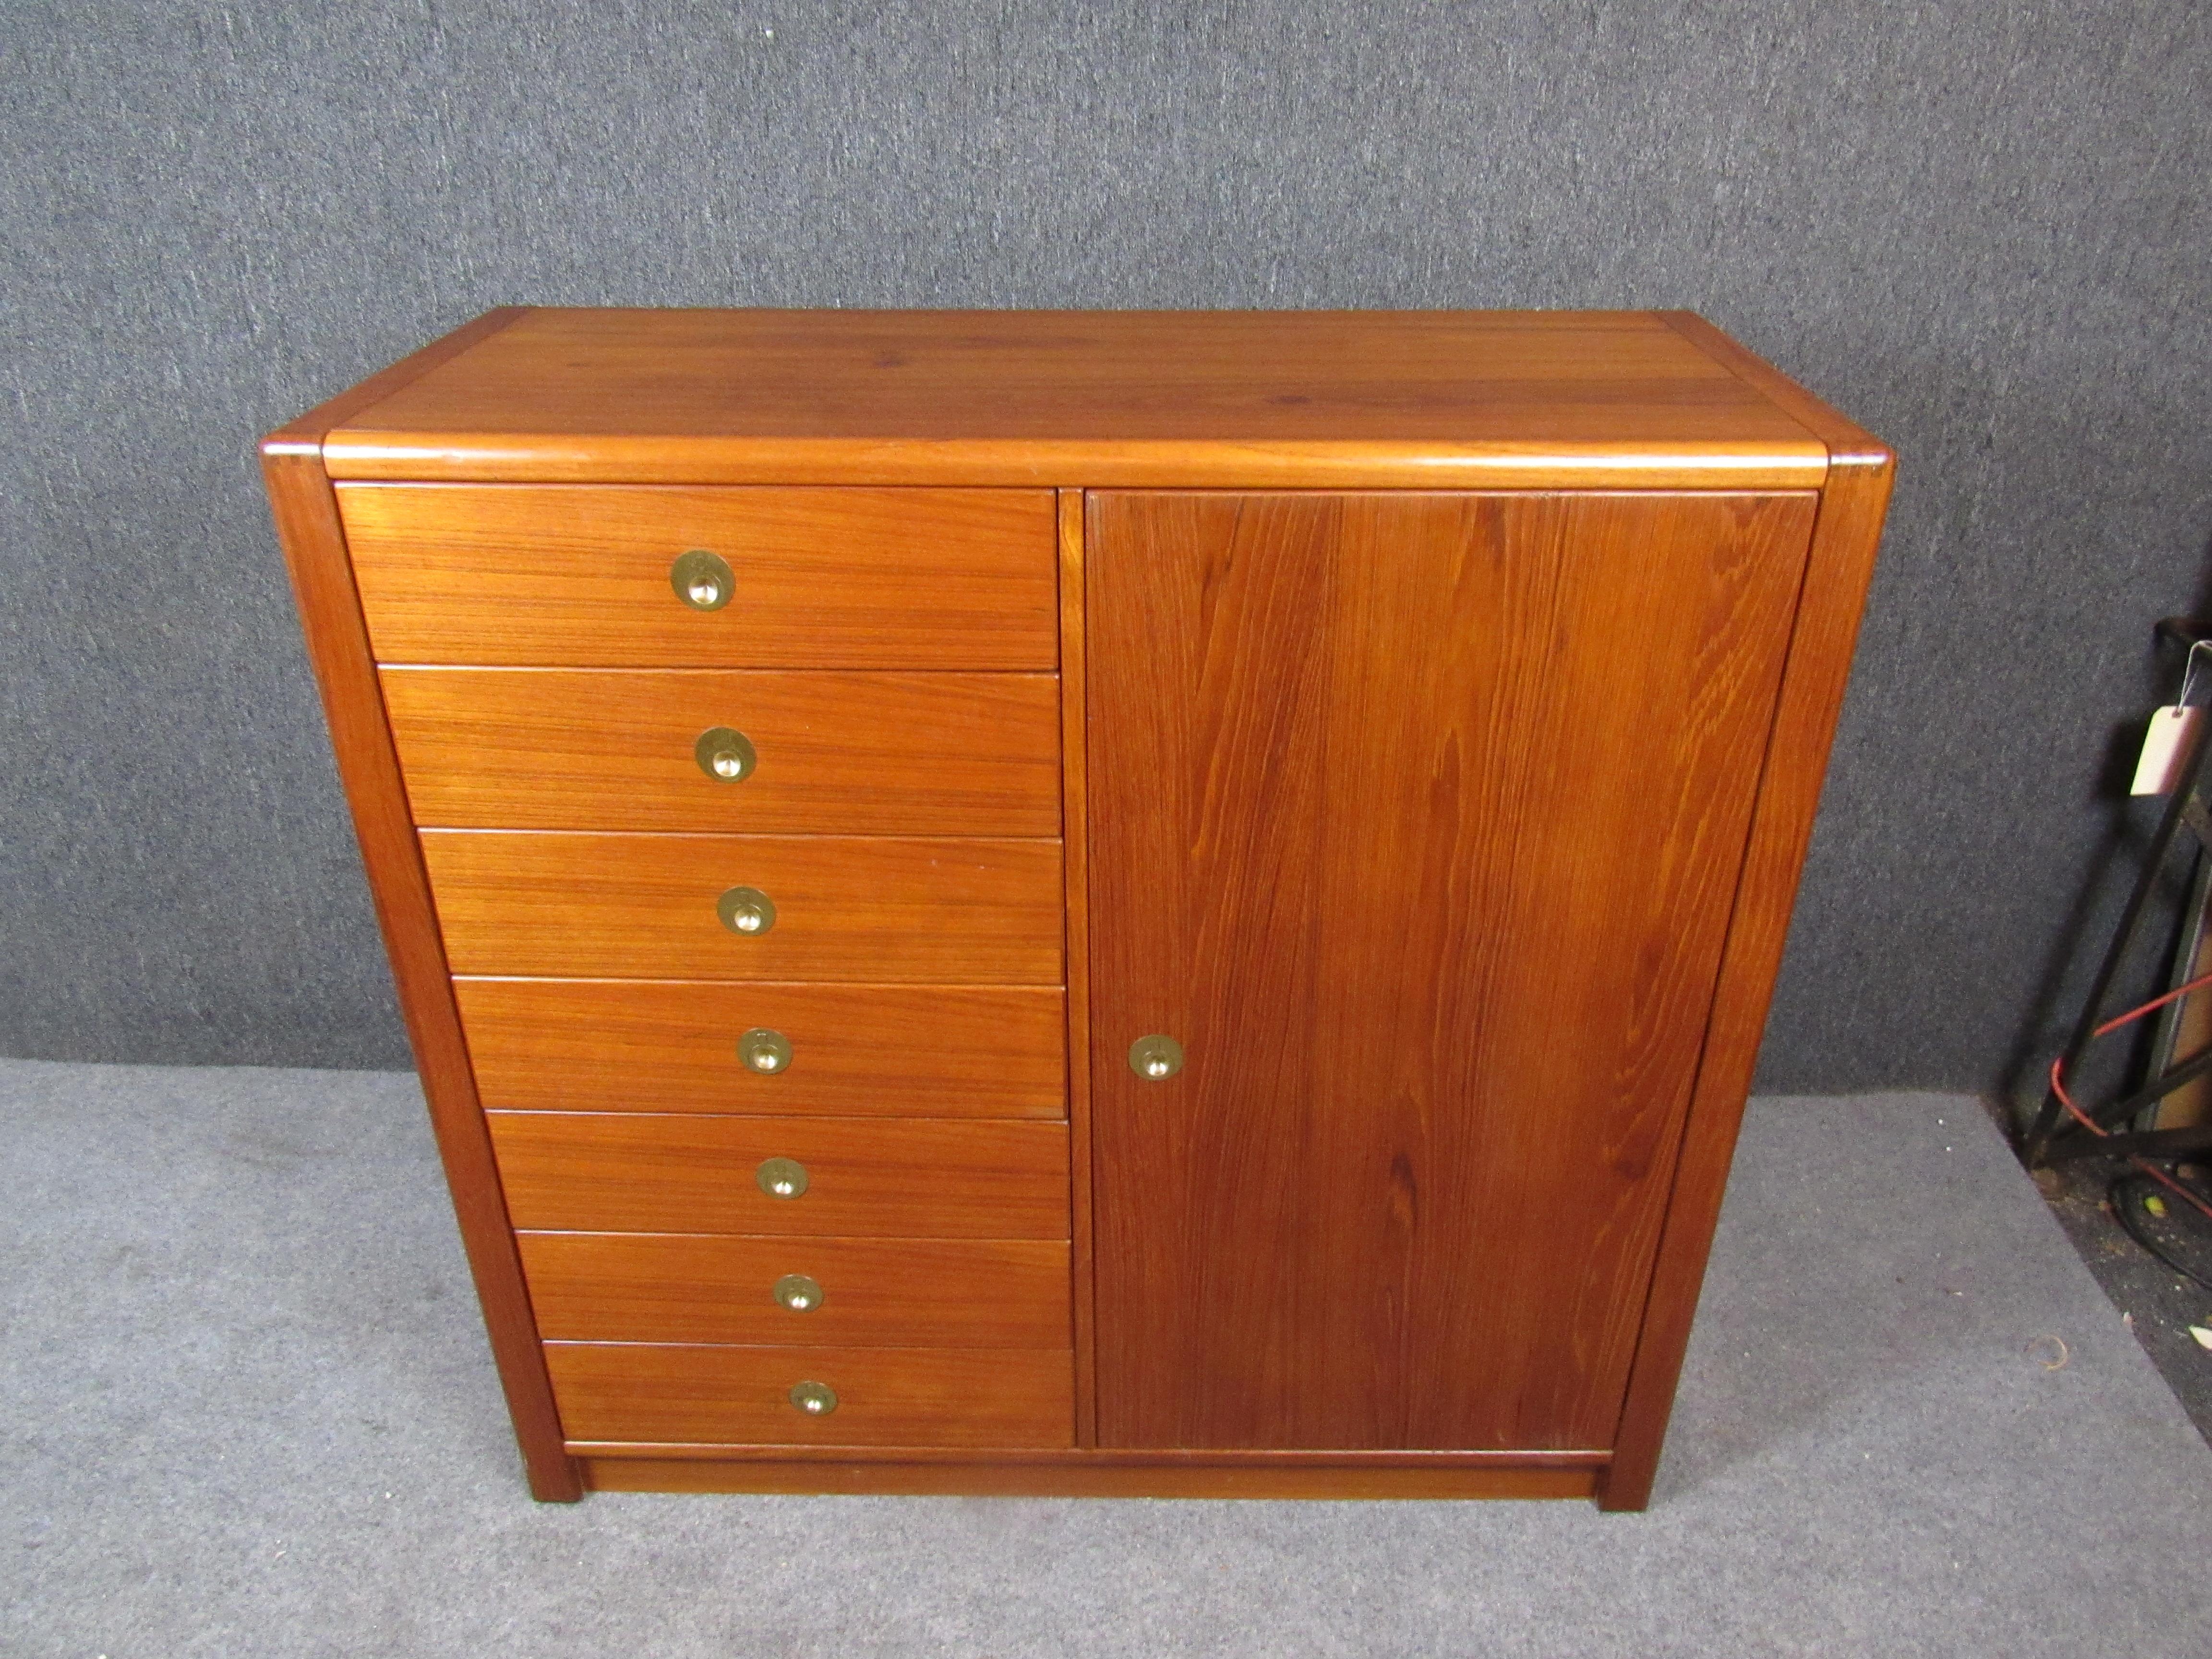 Bring home genuine mid-century modern design with this tremendous gentleman's chest from D-Scan's iconic 